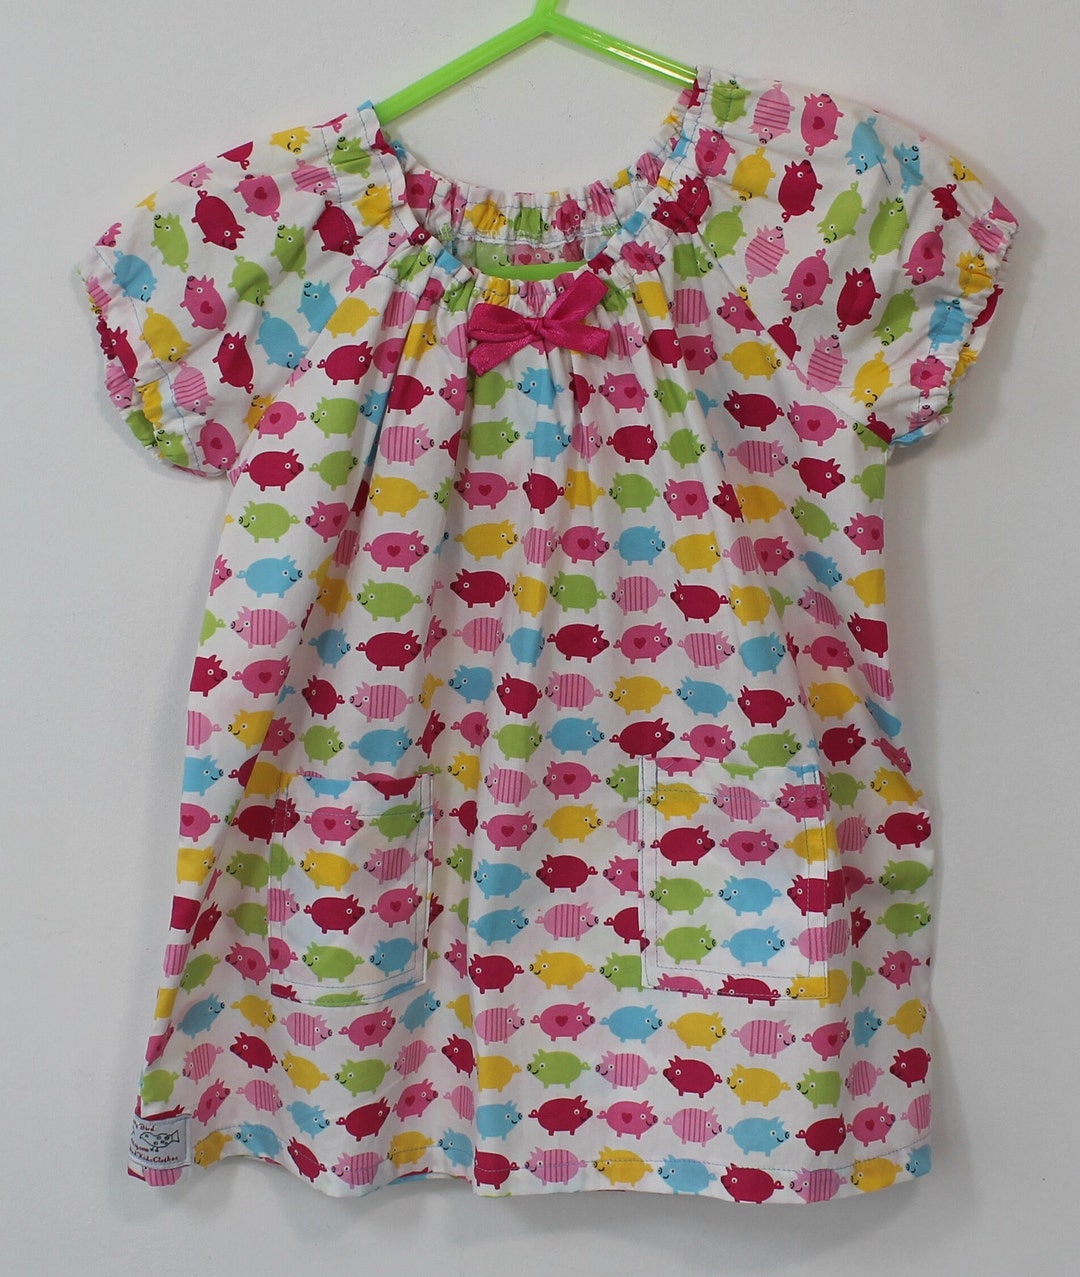 Jolly Little Piggies Gypsy Top for a 3-4 Year Old Girl. Gift - Etsy